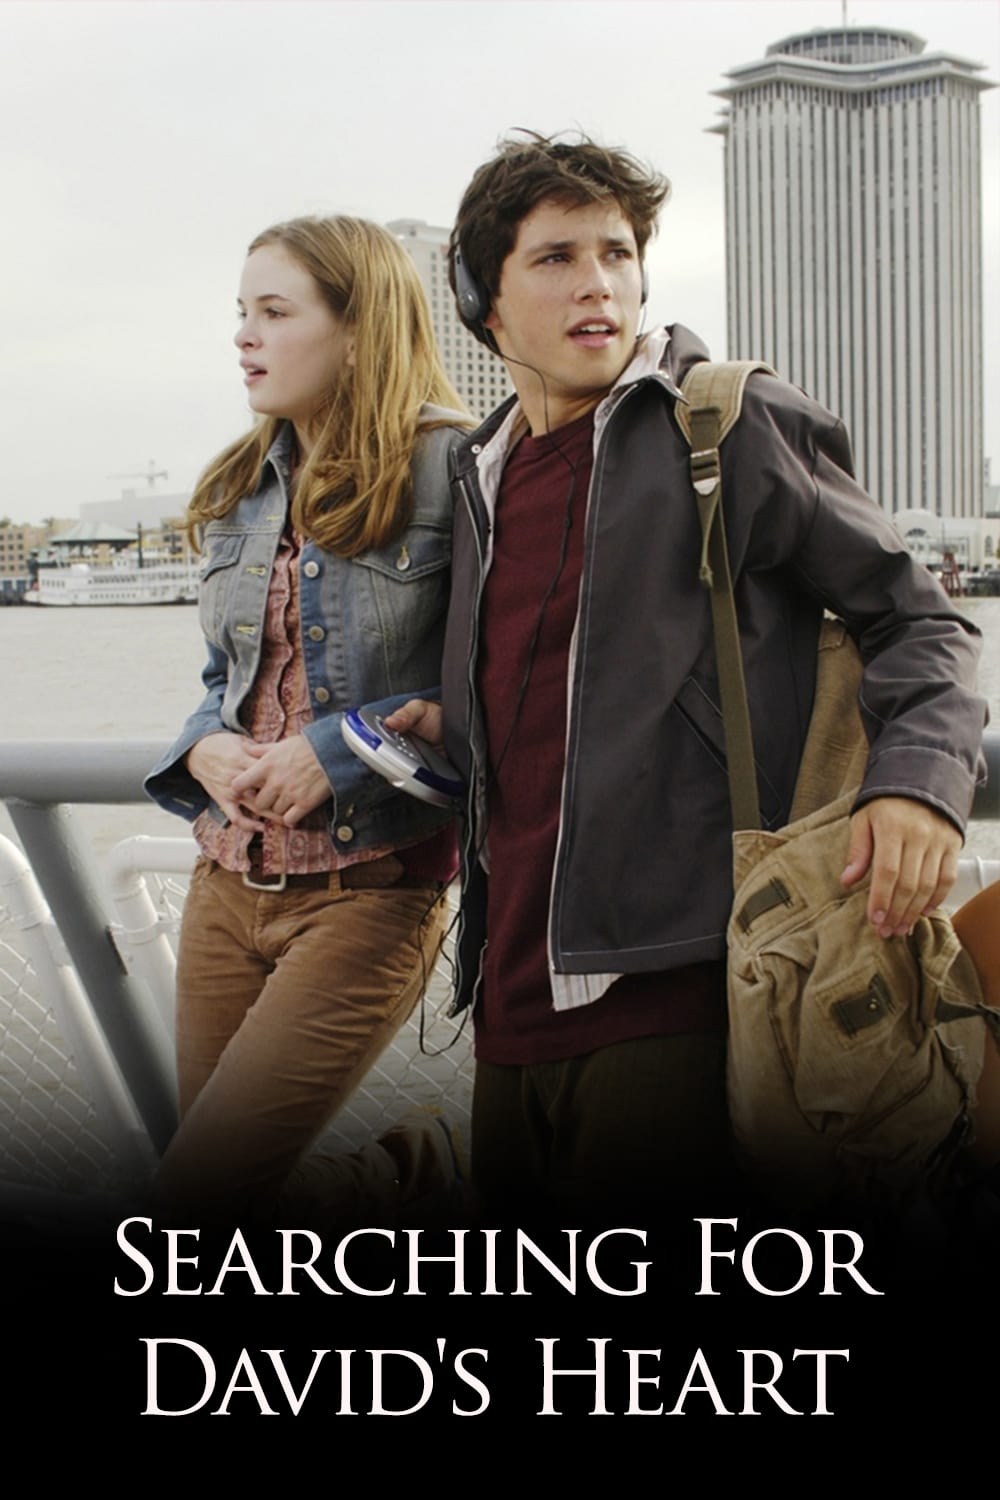 Searching for David's Heart (2004)